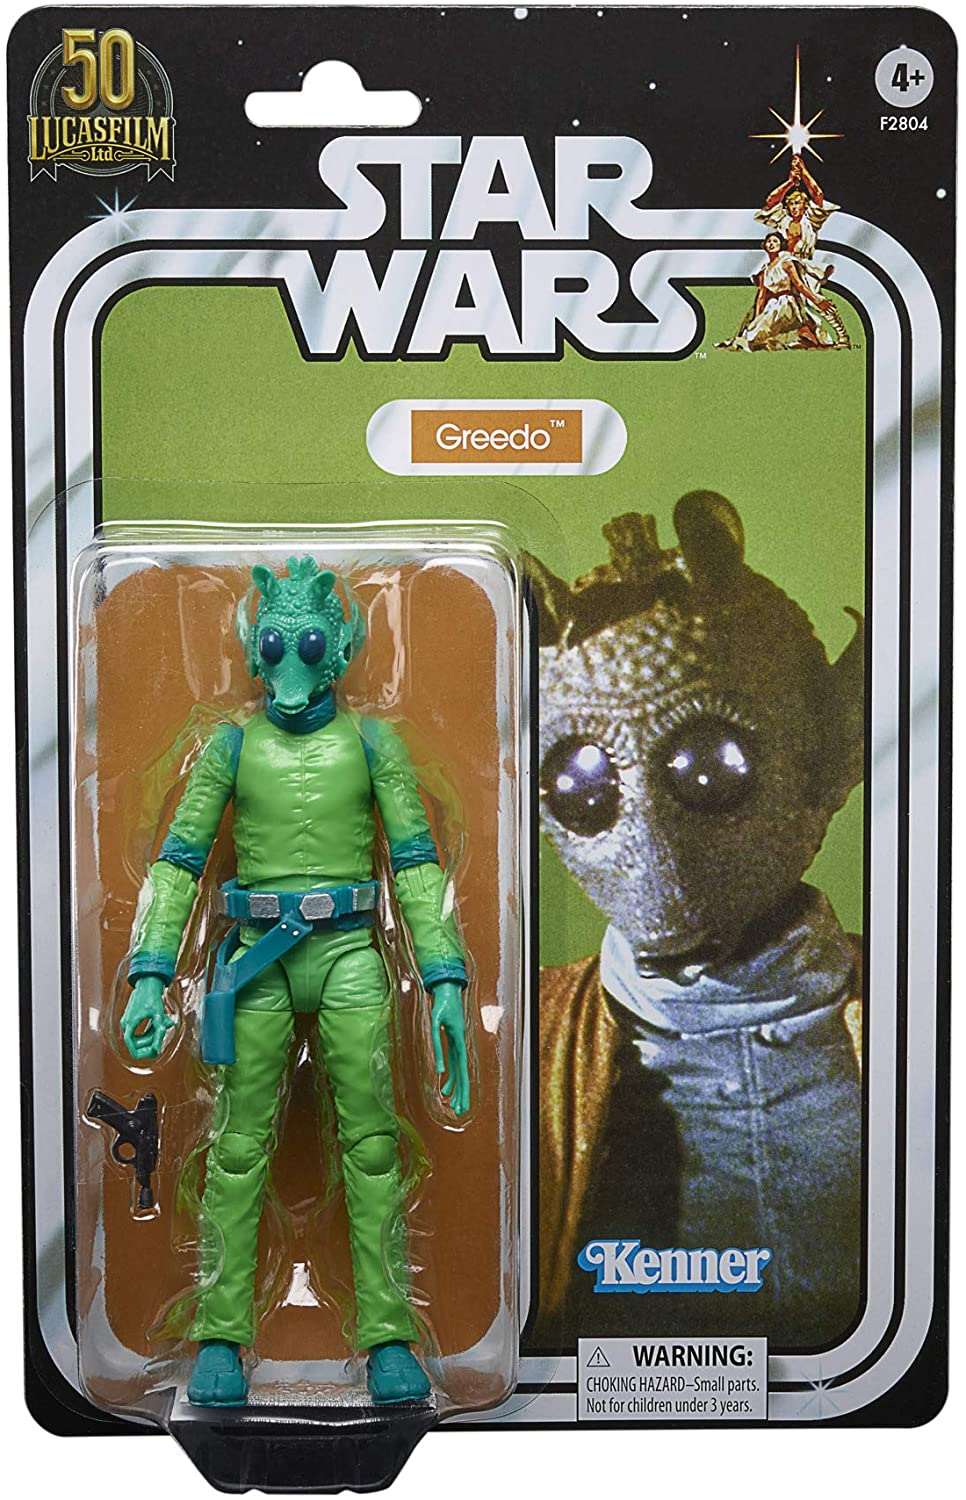 Star Wars The Black Series Greedo 6-Inch-Scale Lucasfilm 50th Anniversary Original Trilogy Collectible Figure in packaging